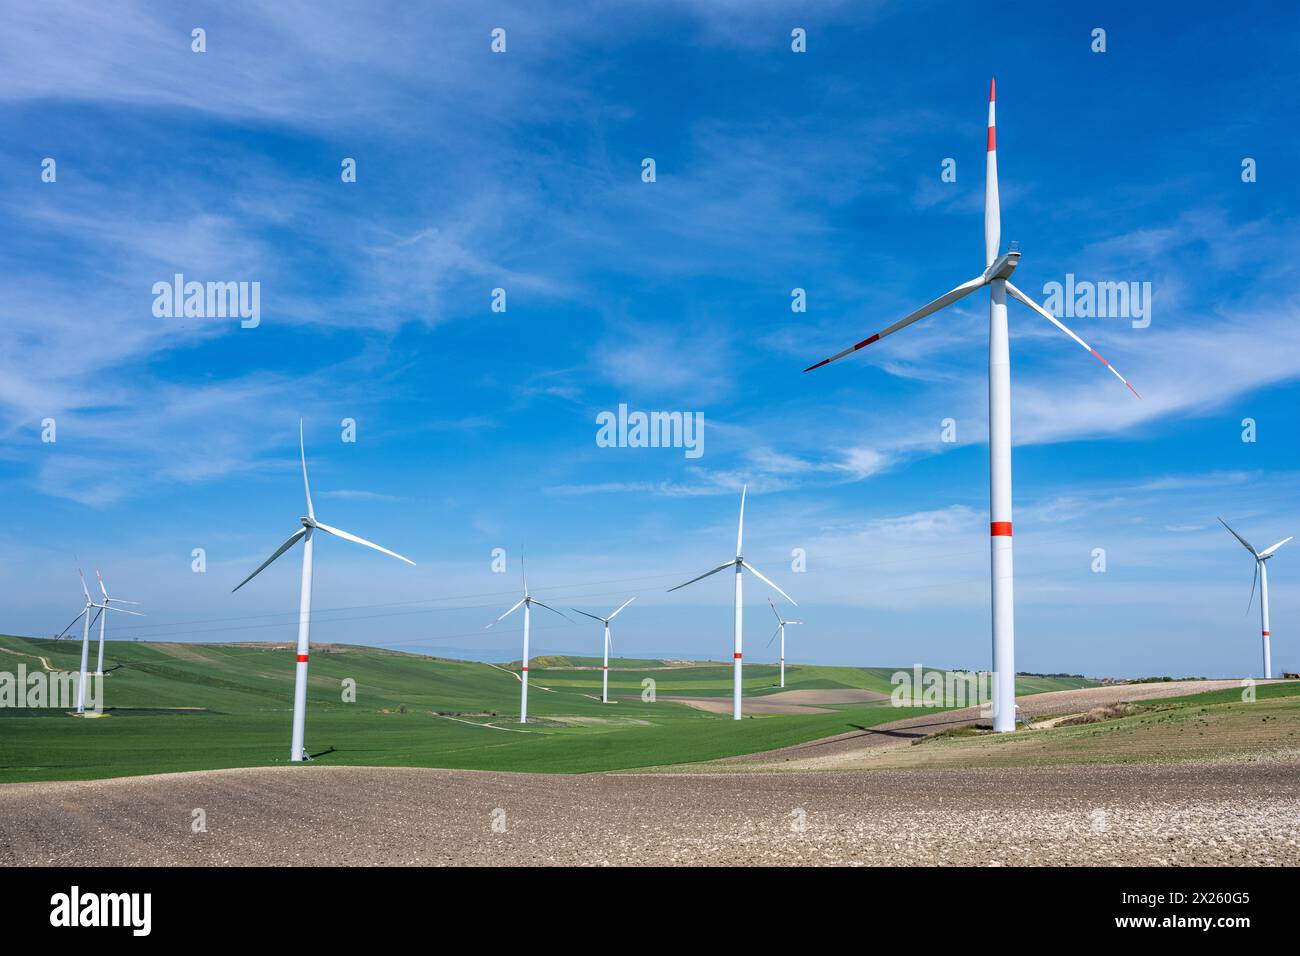 Wind turbines and green agricultural landscape seen in southern Italy Stock Photo